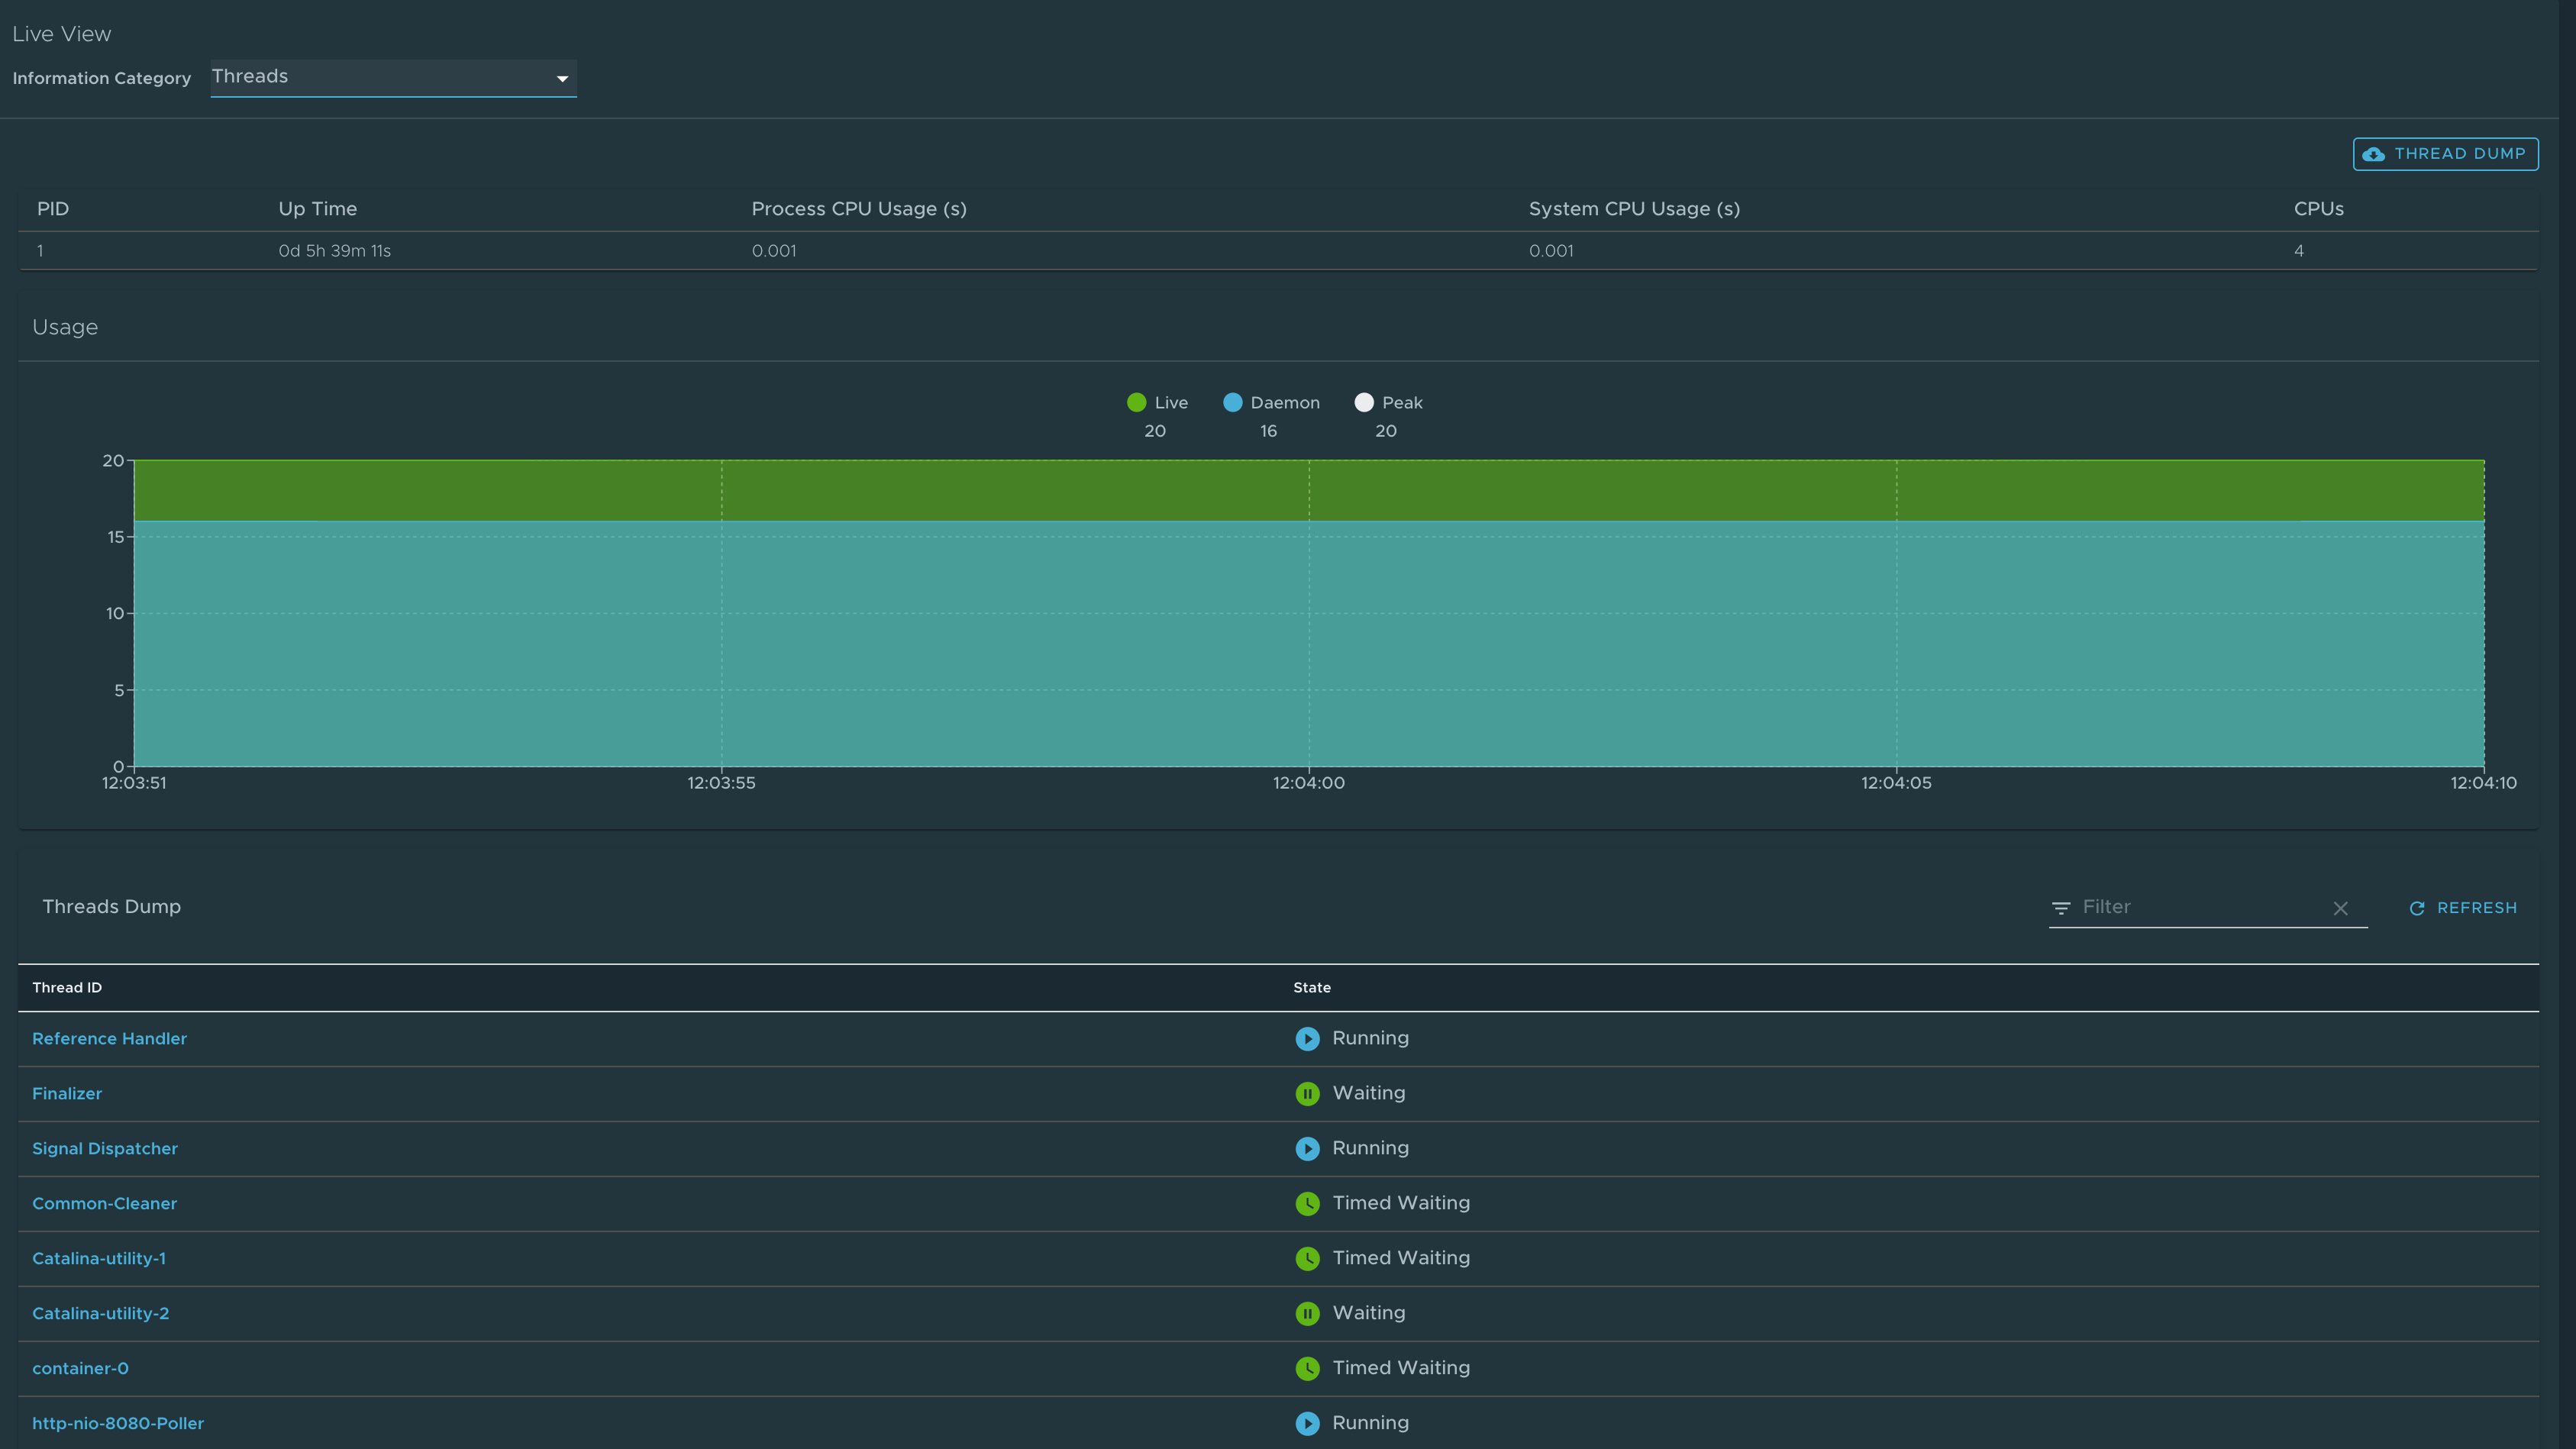 Screenshot of the Threads page in the Application Live View UI.